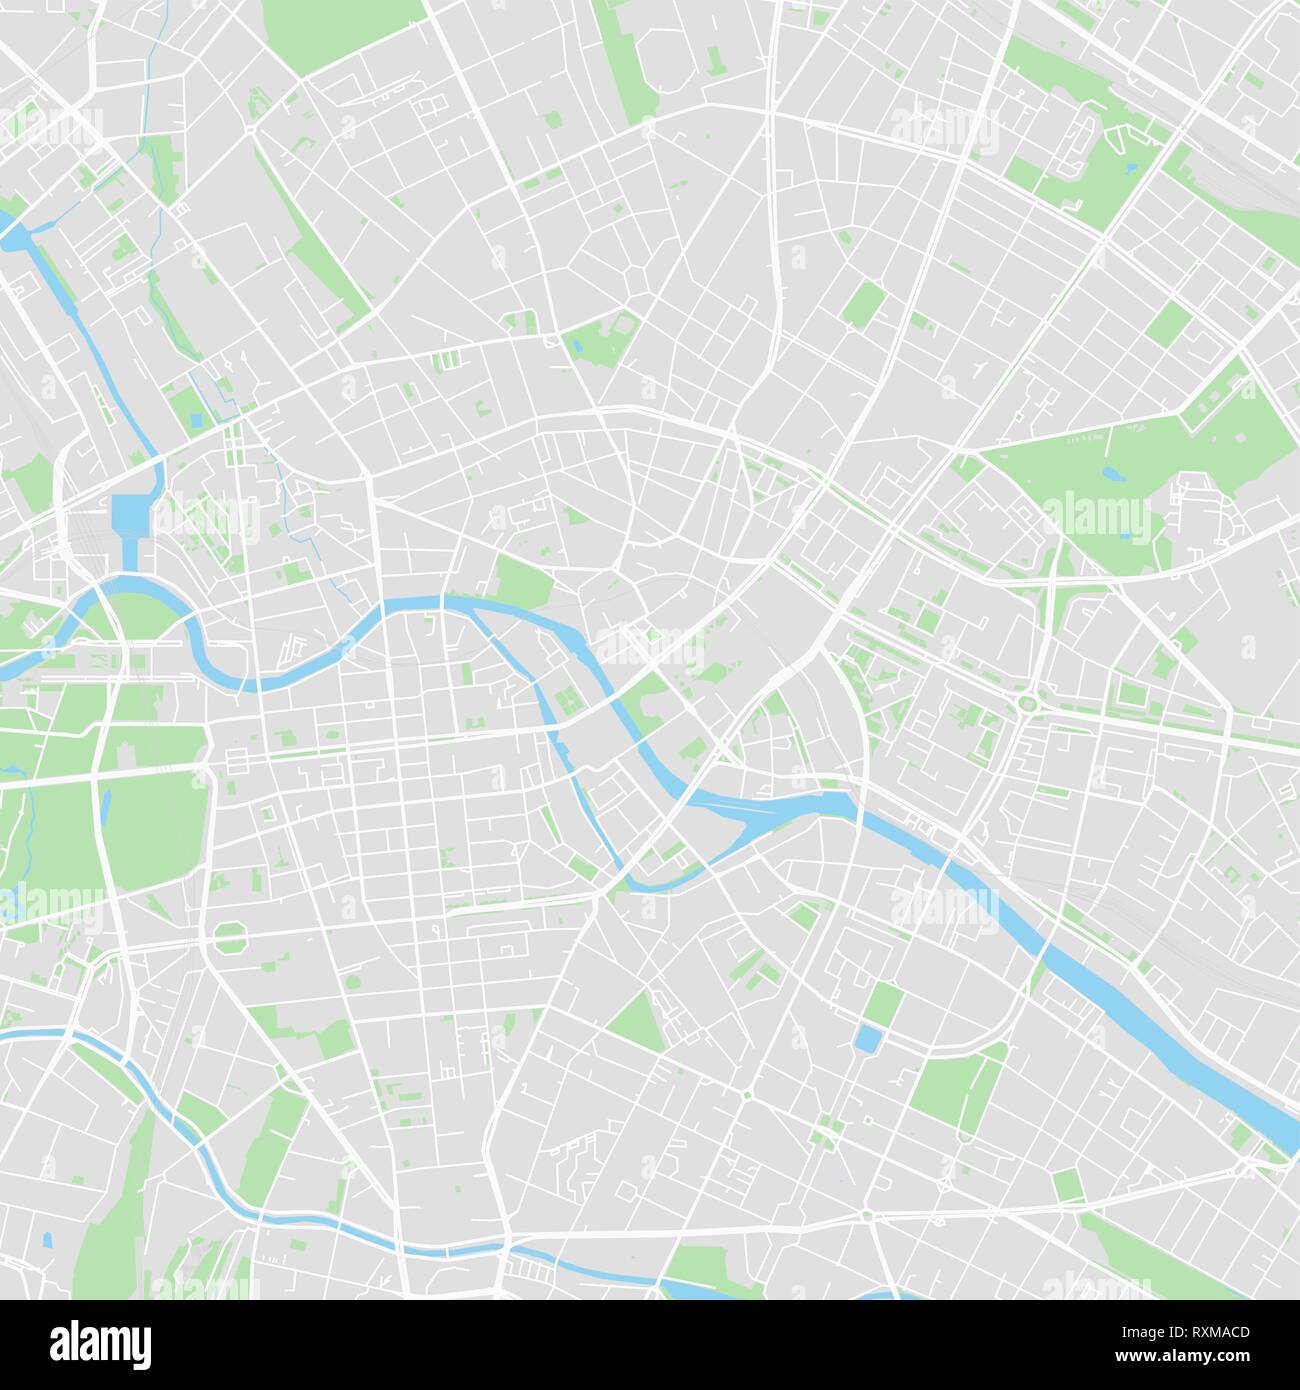 Downtown vector map of Berlin, Germany. This printable map of Berlin contains lines and classic colored shapes for land mass, parks, water, major and  Stock Vector